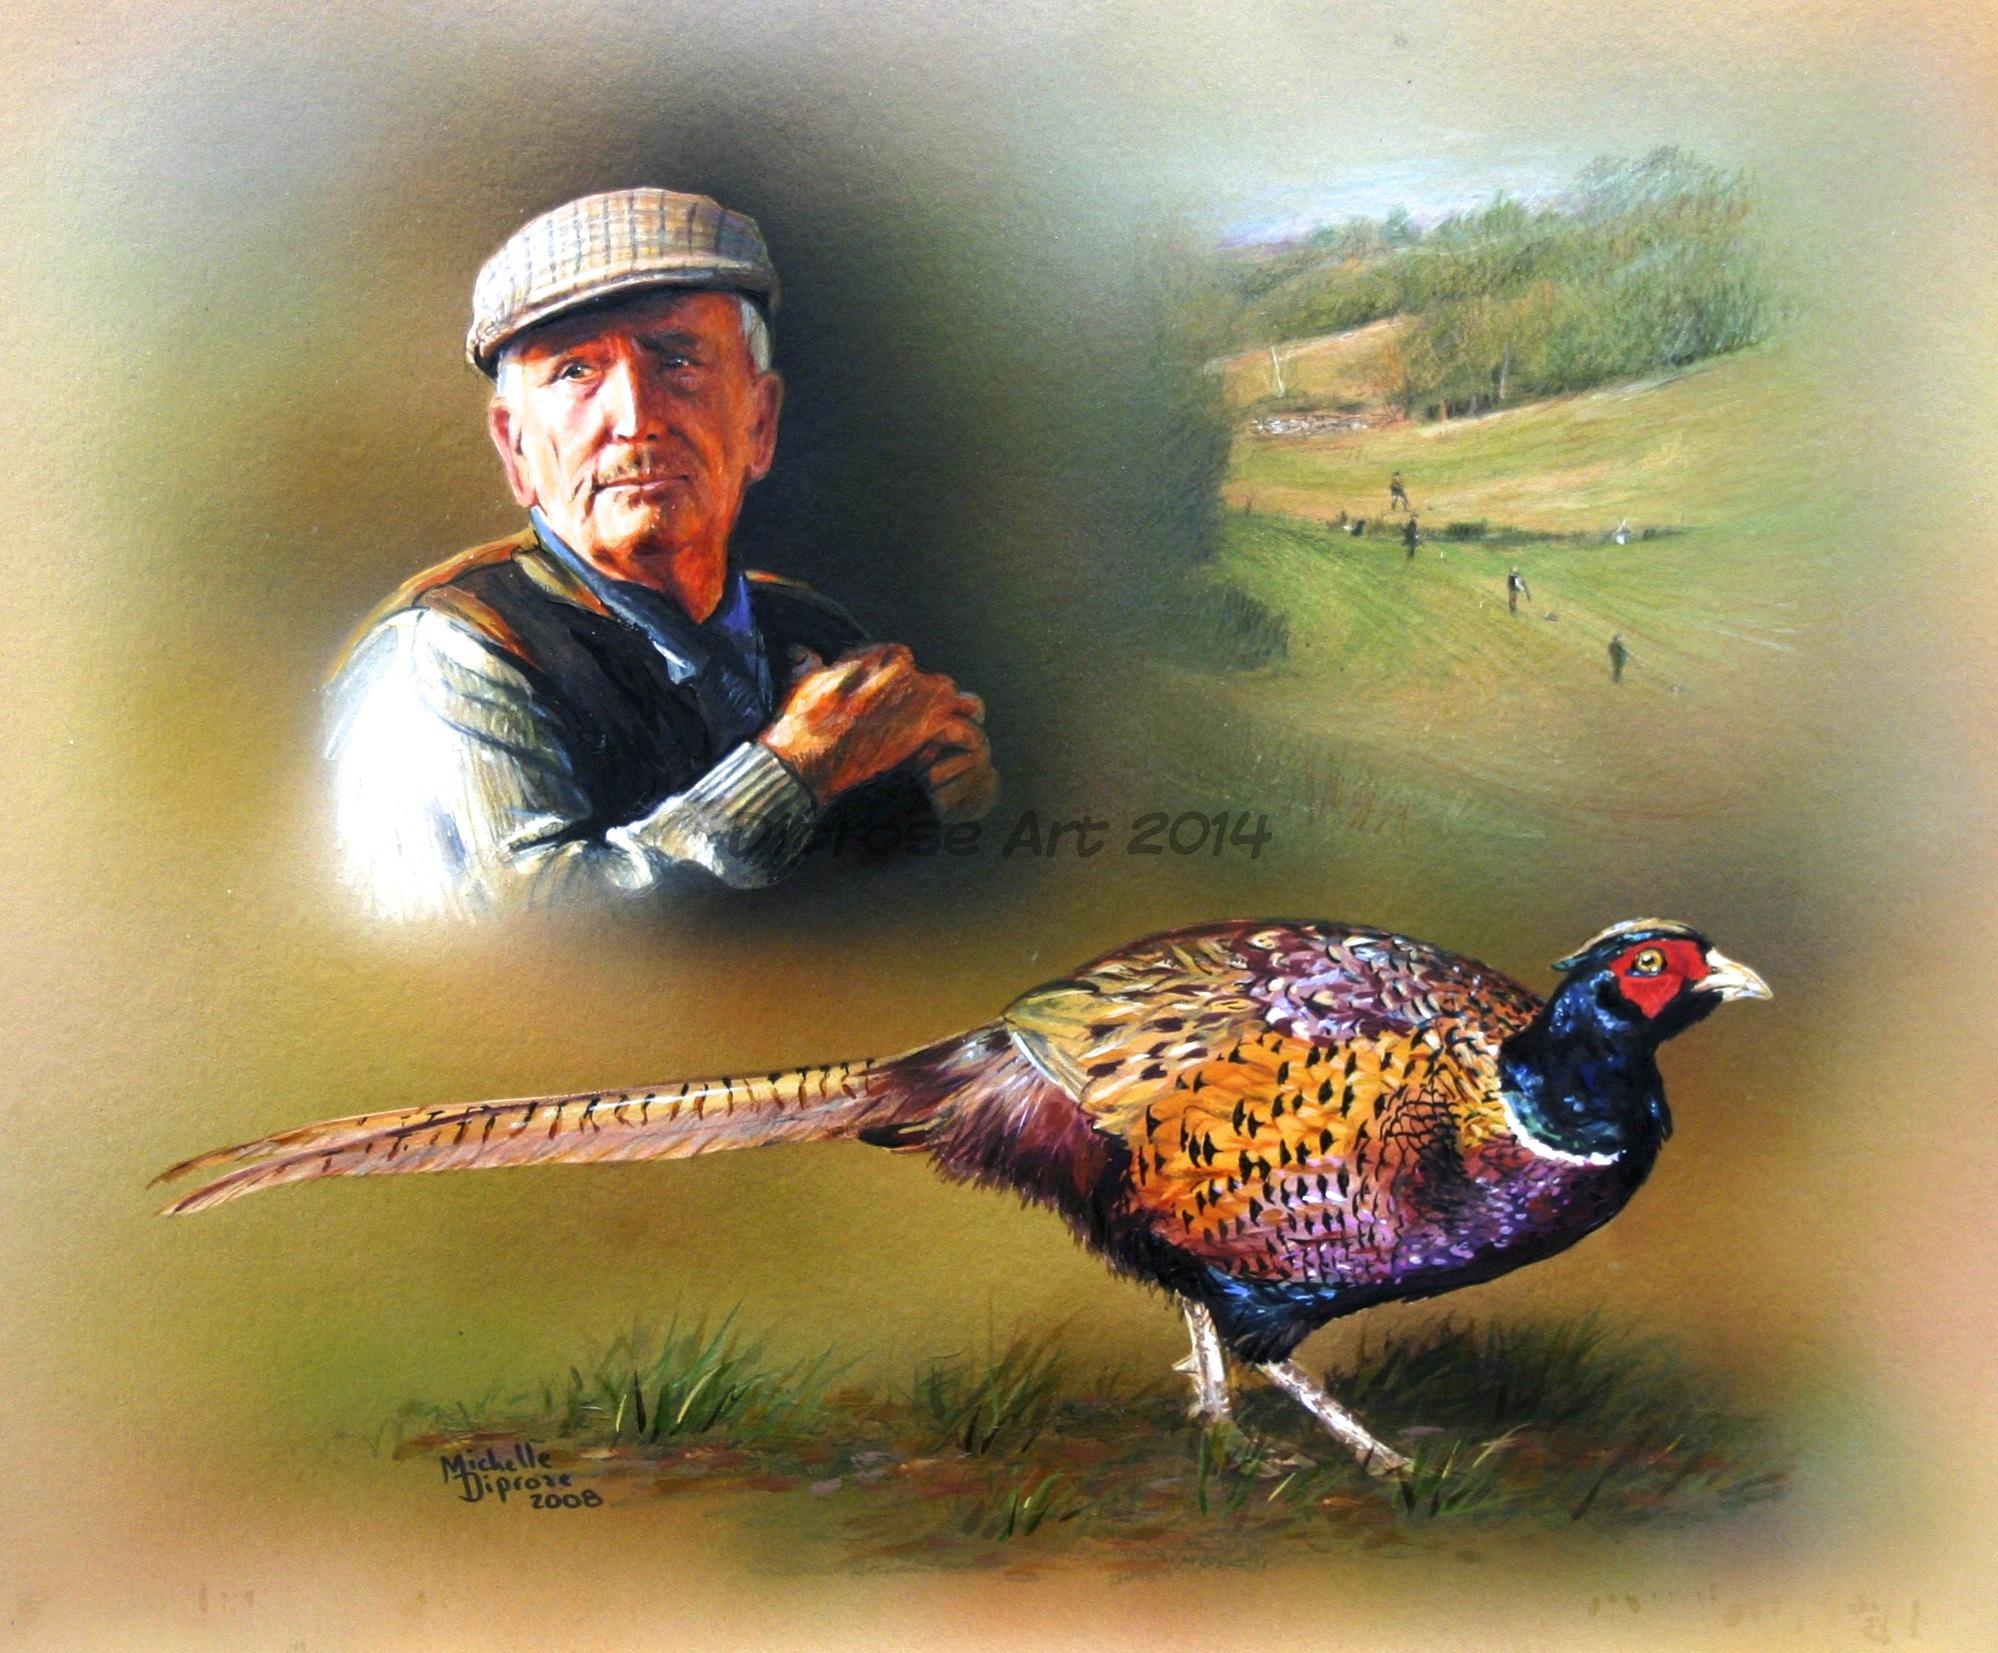 Acrylics on board - approx A3 - people portraits - Doug was game keeper at Tower Shoot and I was commissioned to do this portrait as his retirement present which was a real privilege.